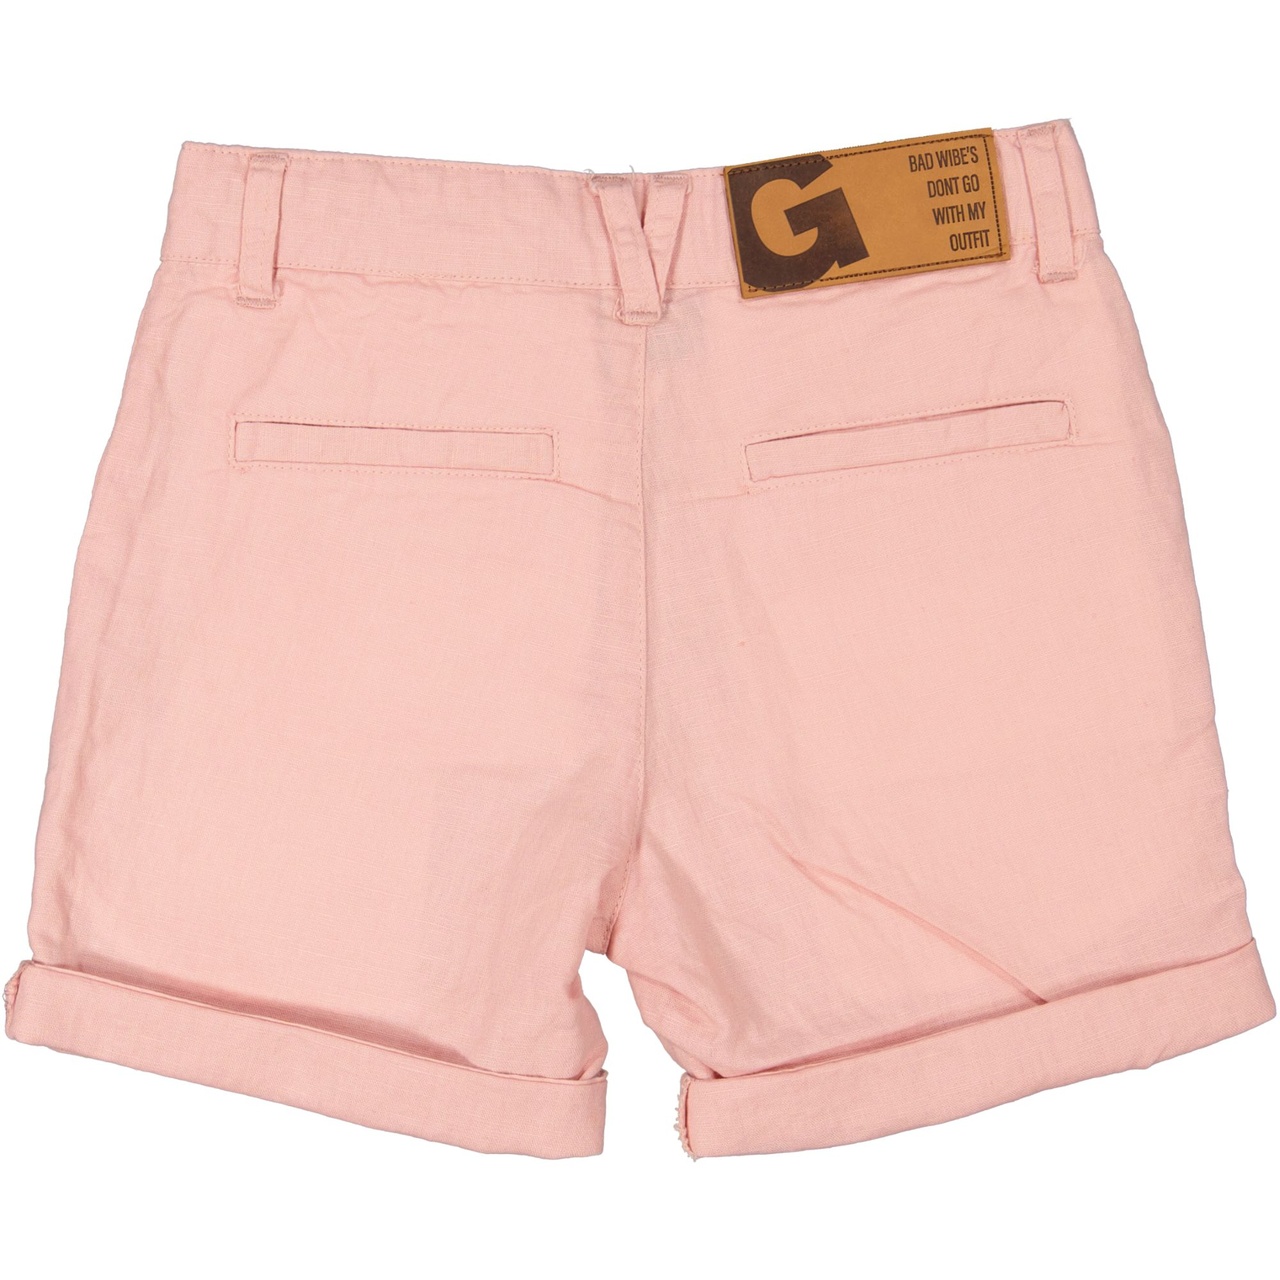 Linnen shorts Old pink 134/140